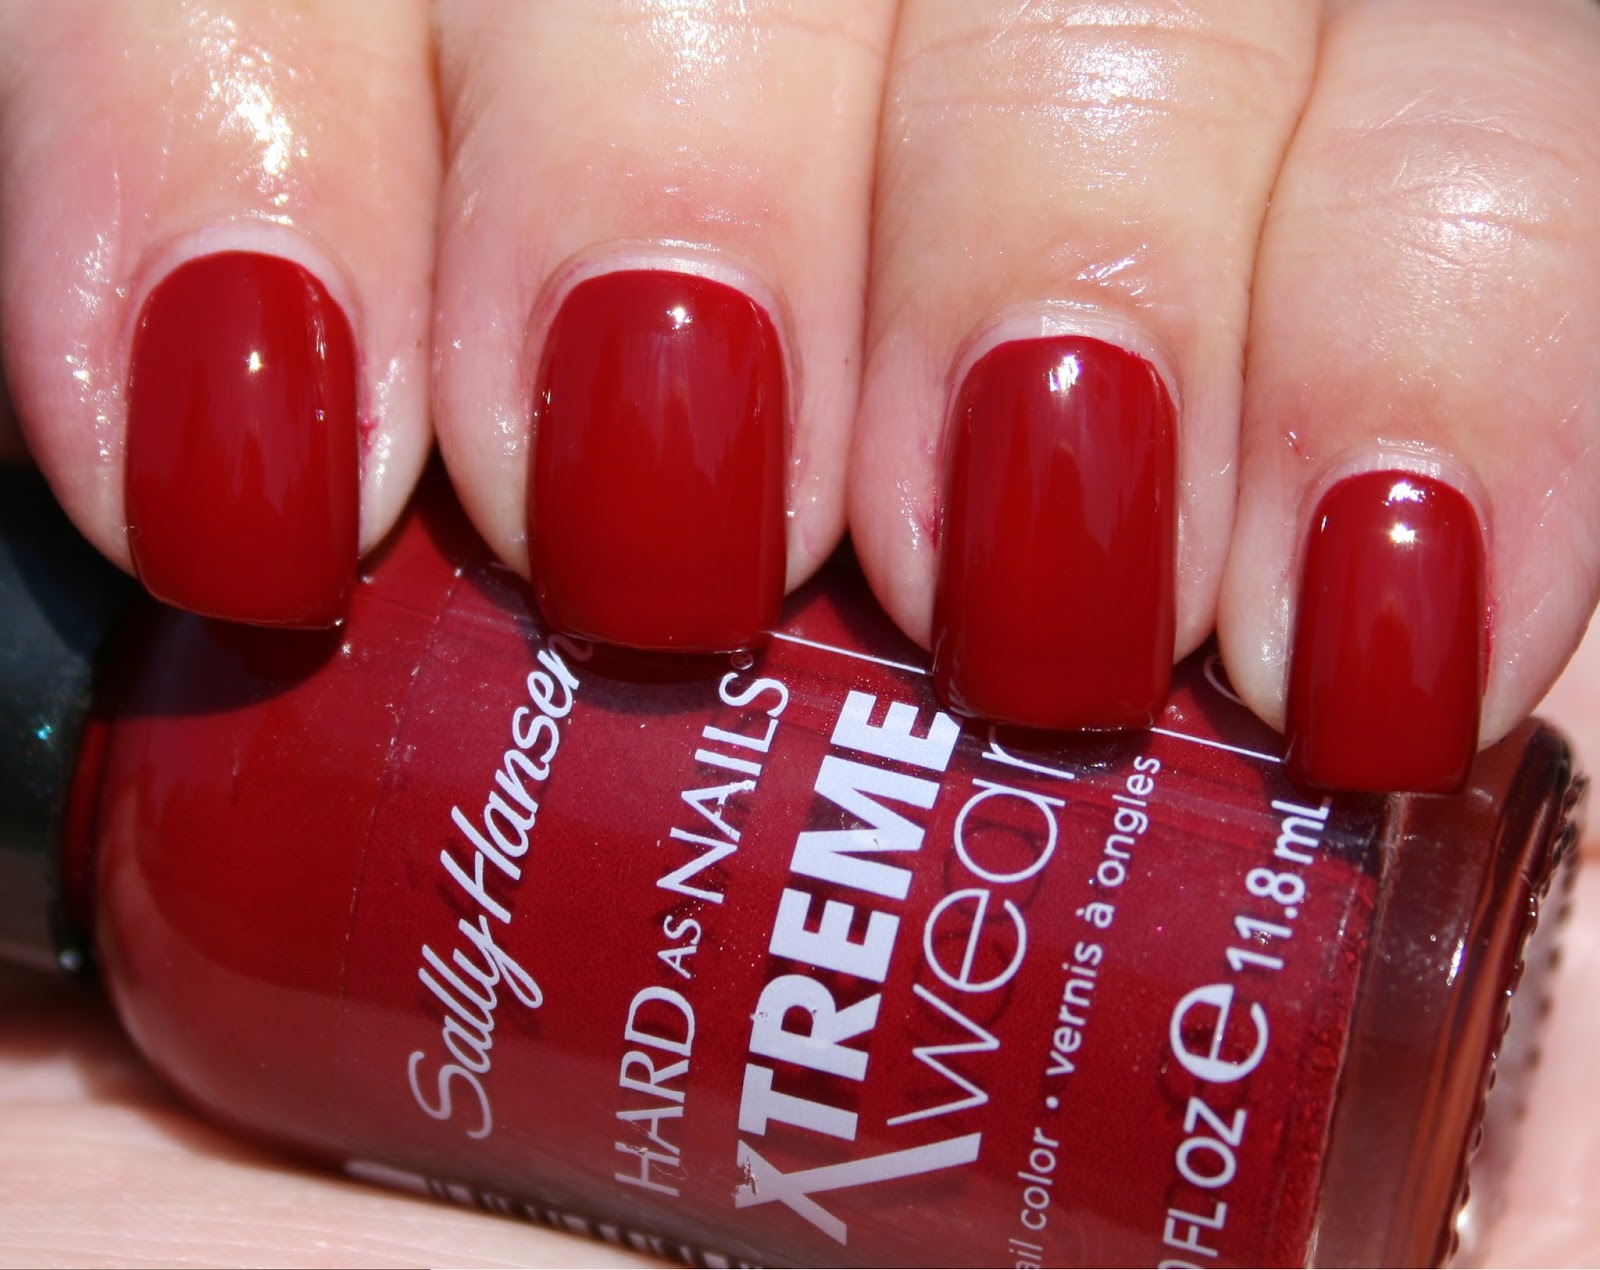 Sally Hansen Xtreme Wear Nail Color - wide 8